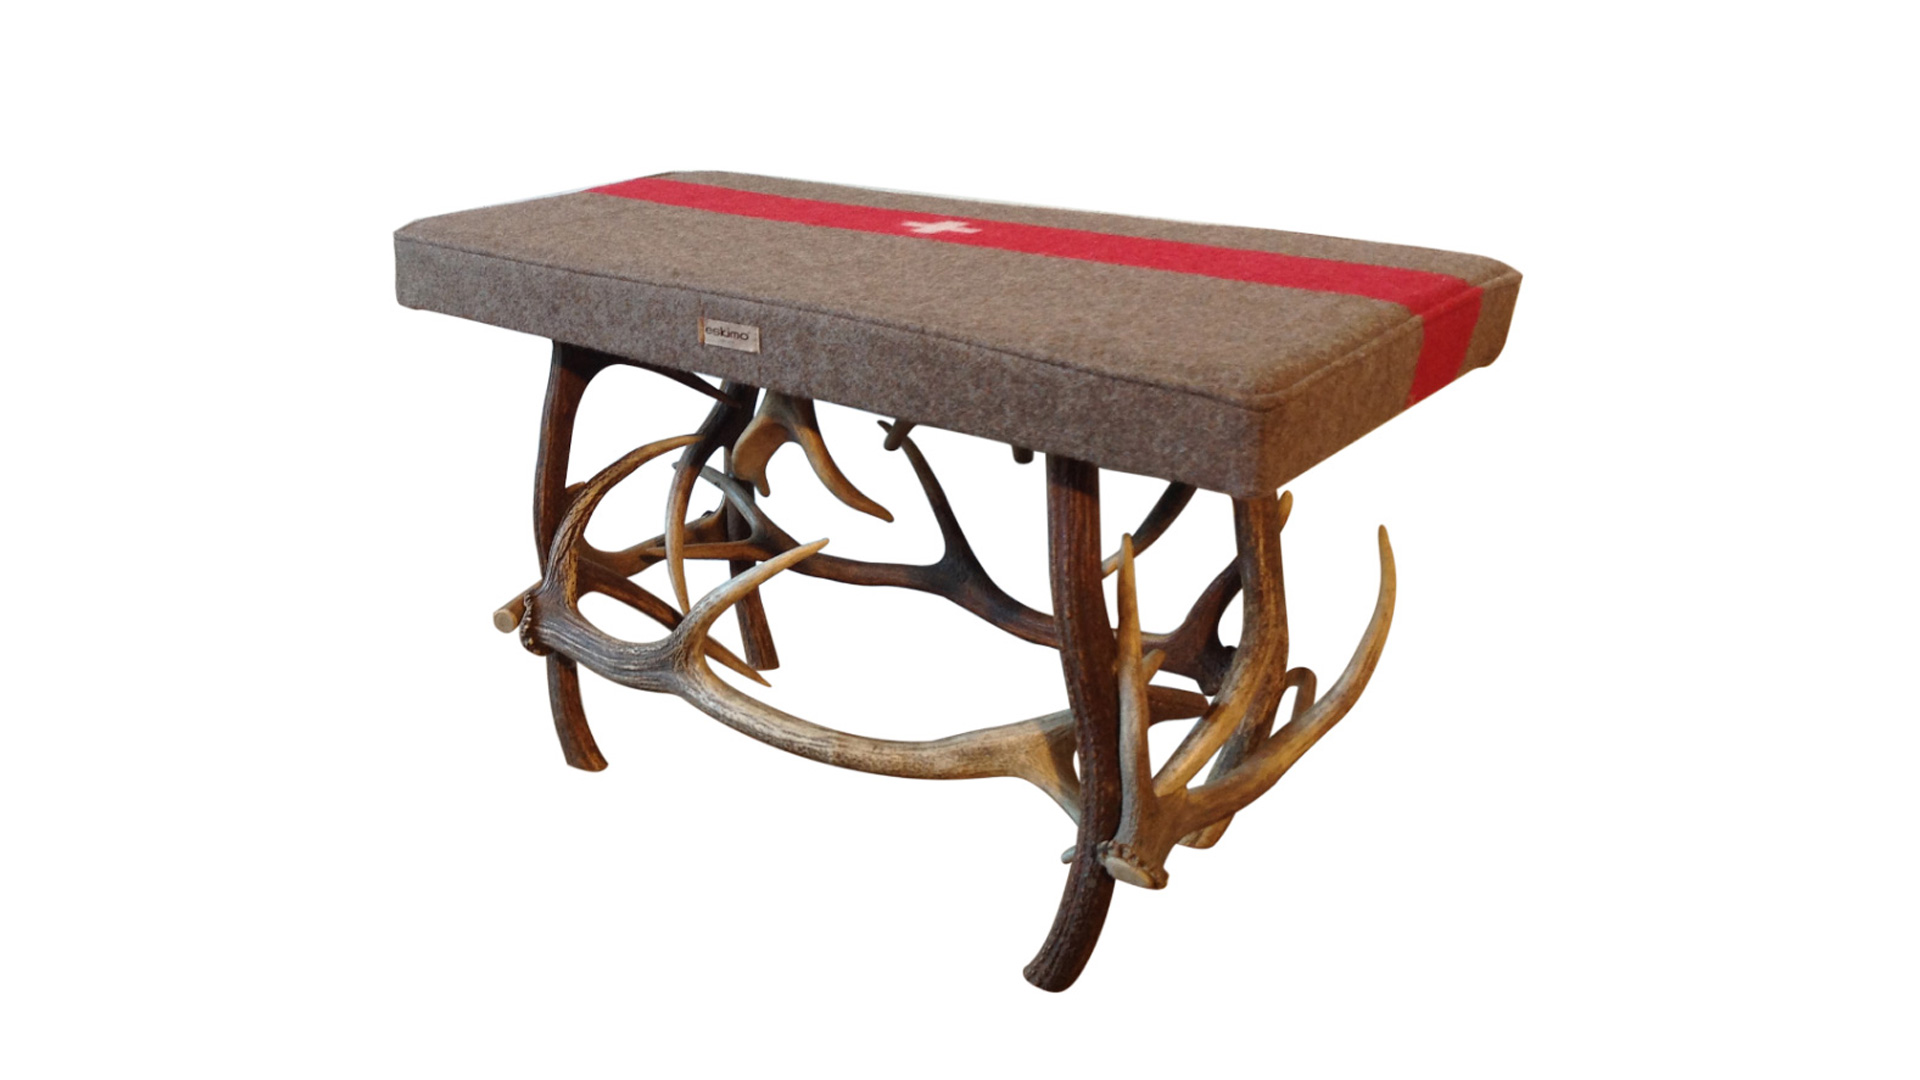 Eskimo bench with Swiss military blanket on antlers